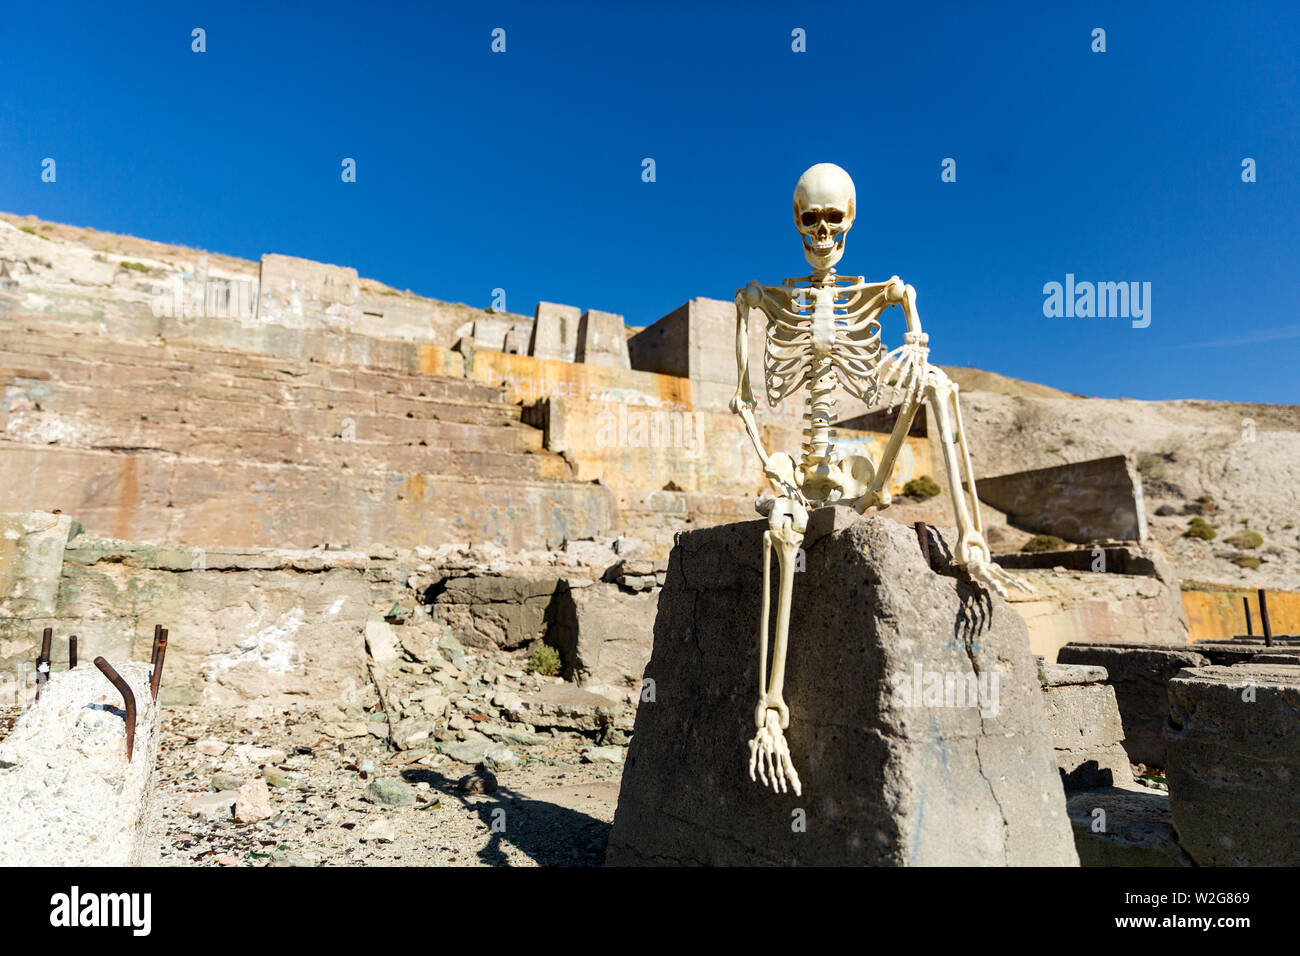 Skeleton posing in mining ruins in the desert on a hot day Stock Photo